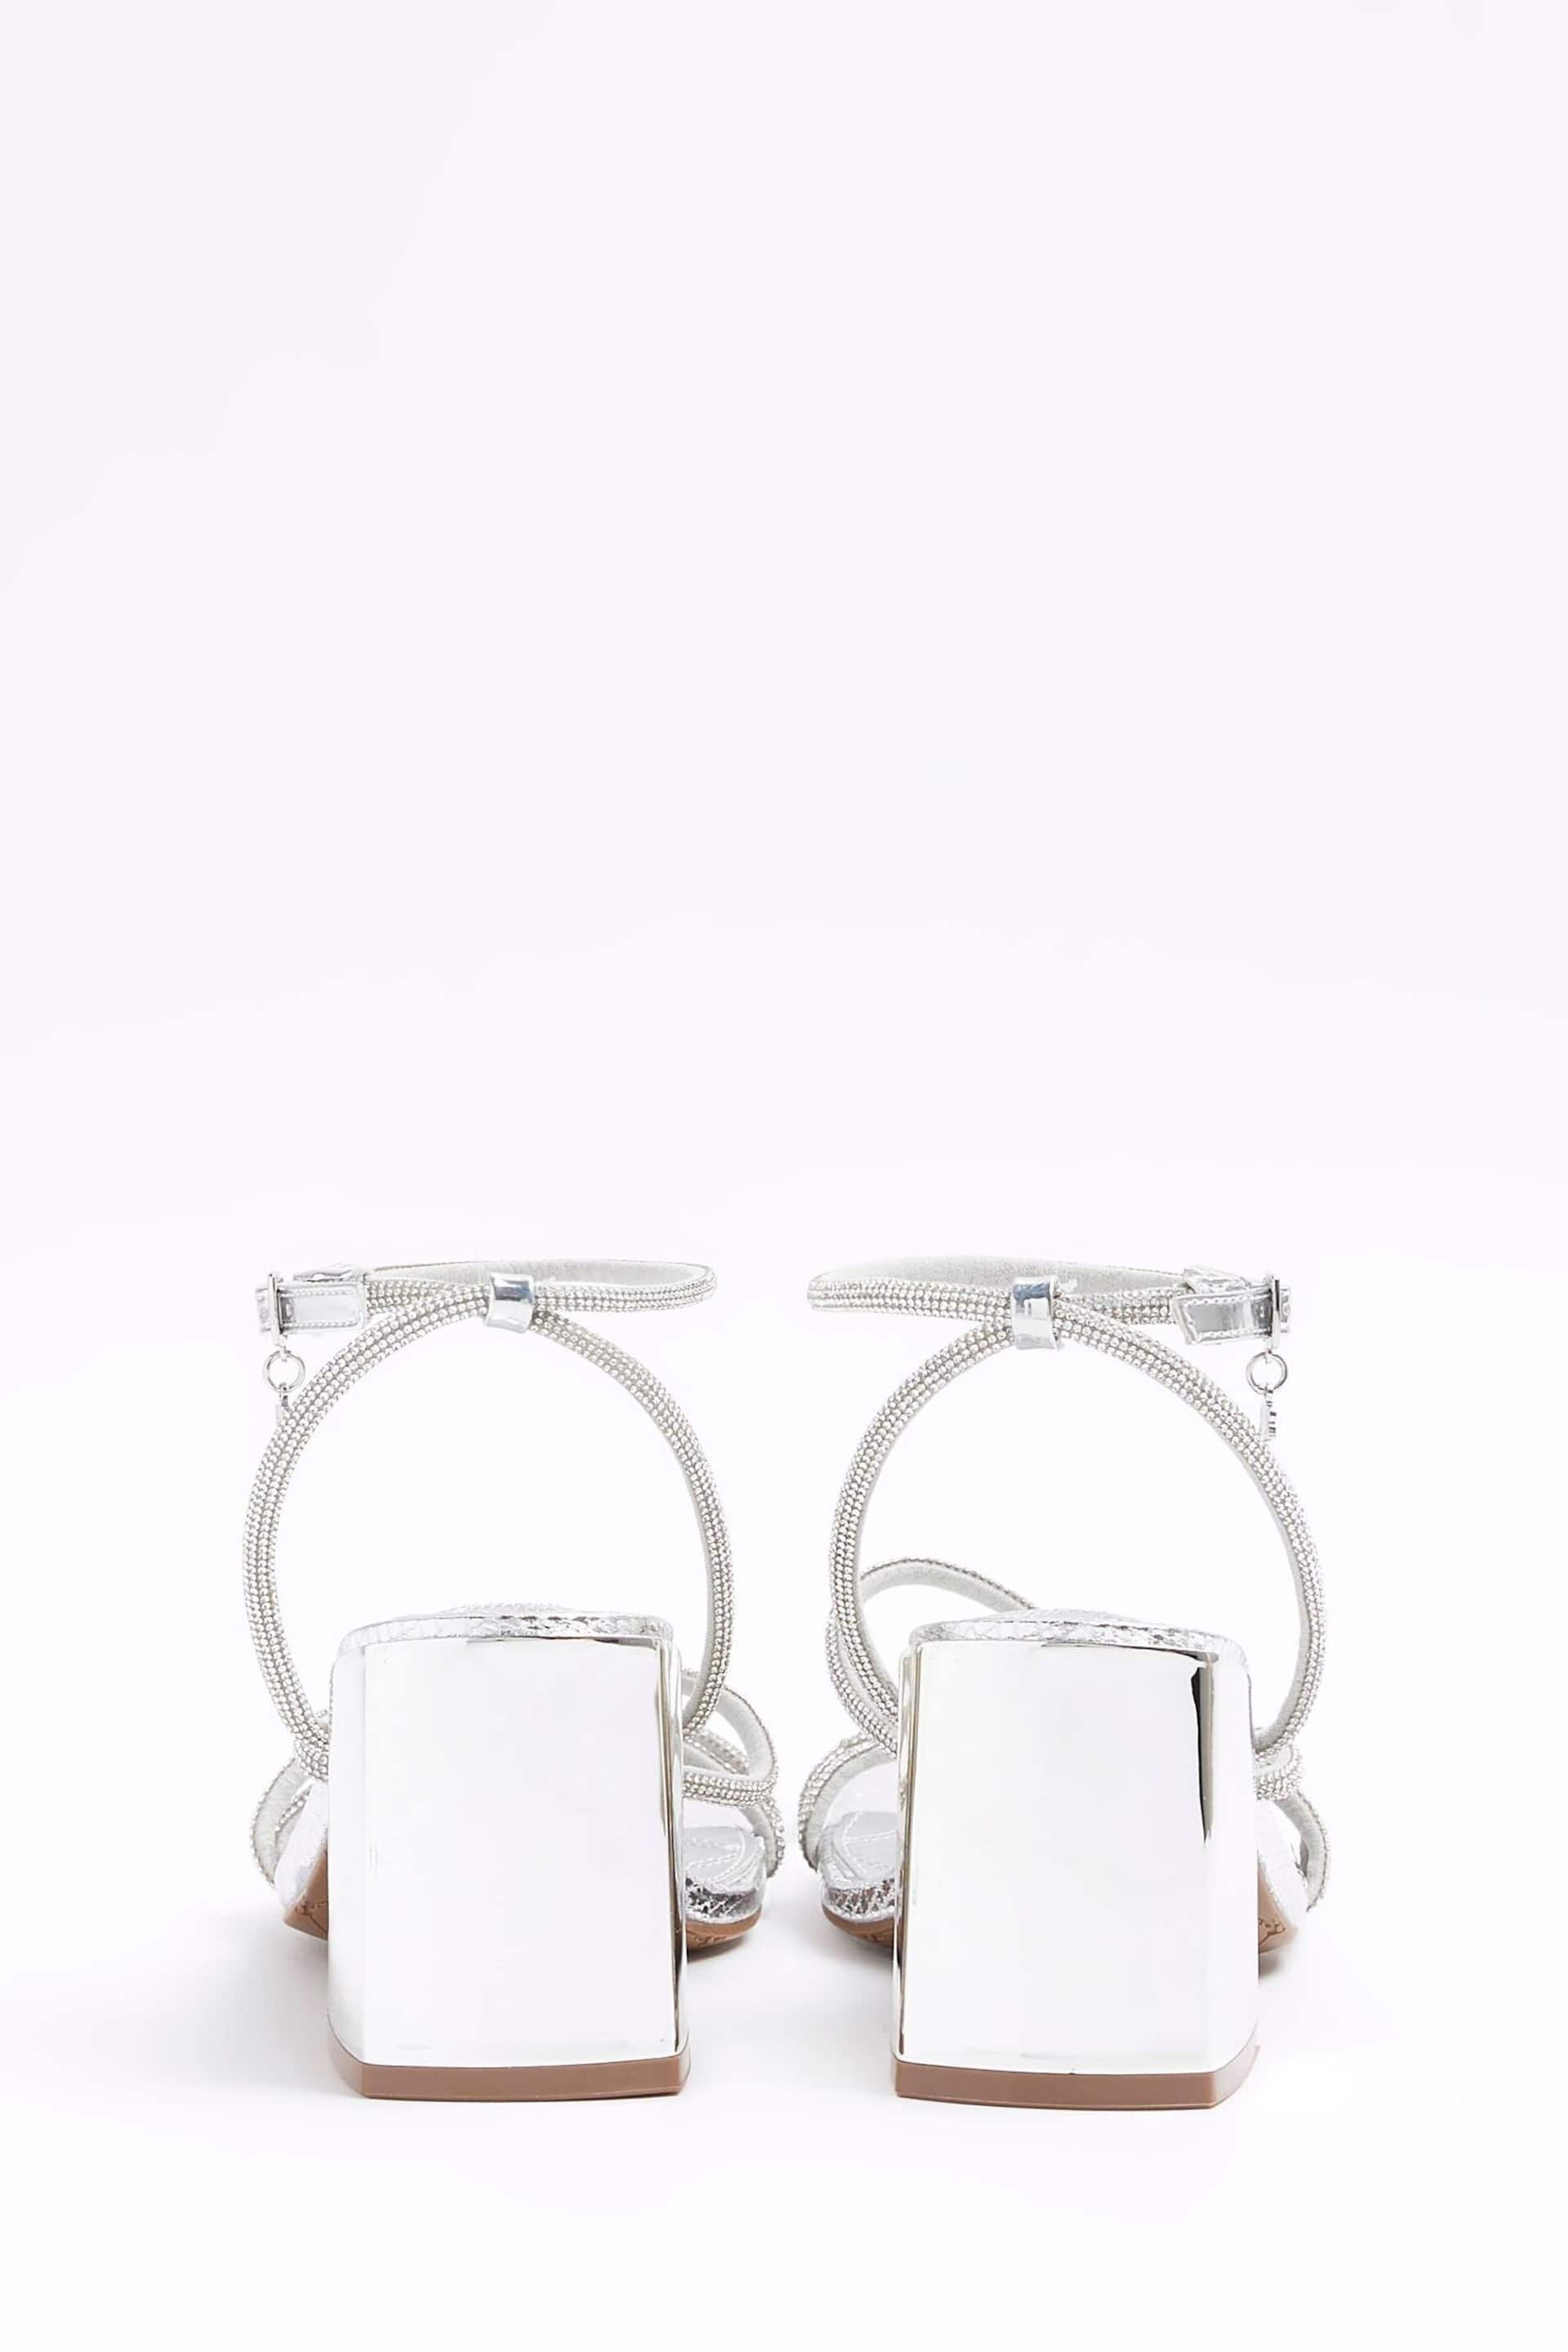 River Island Silver Clipped Tubular Heeled Sandals - Image 3 of 4